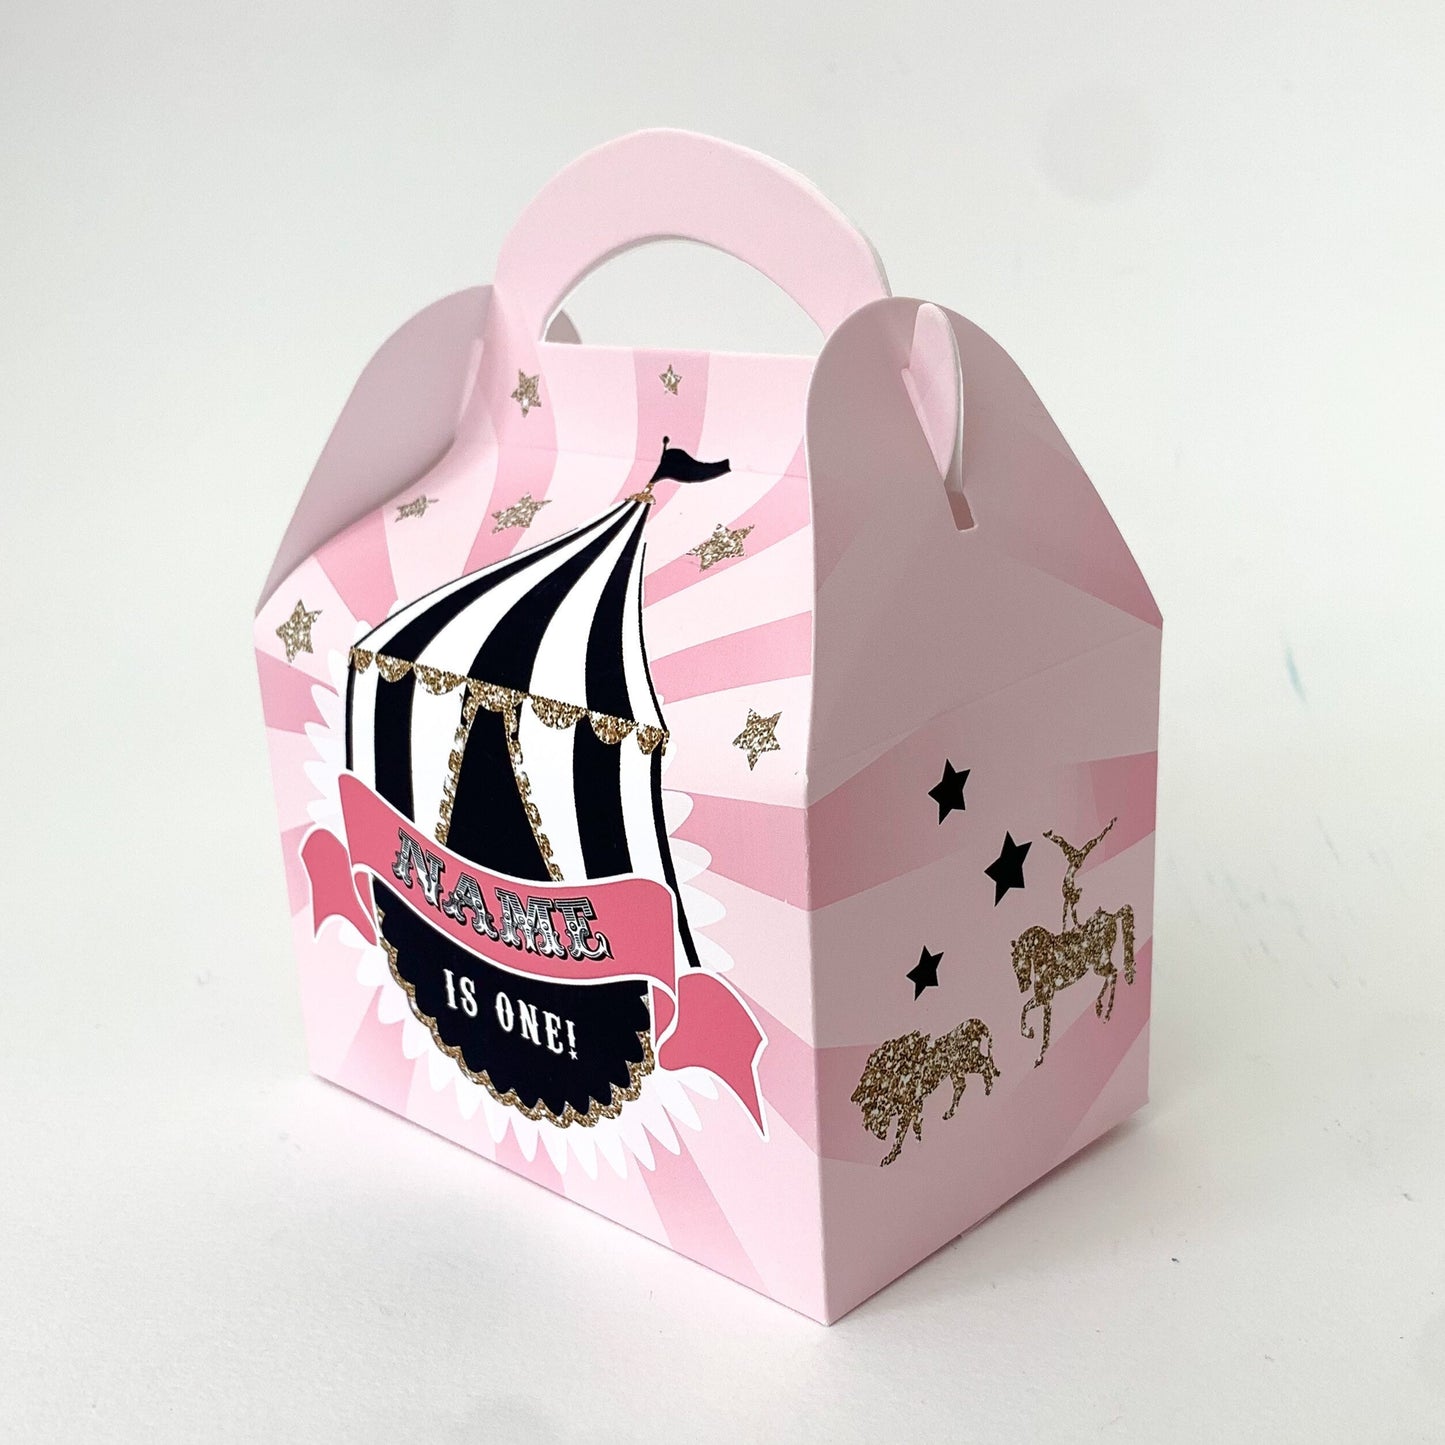 Circus carnival Personalised Children’s Party Box